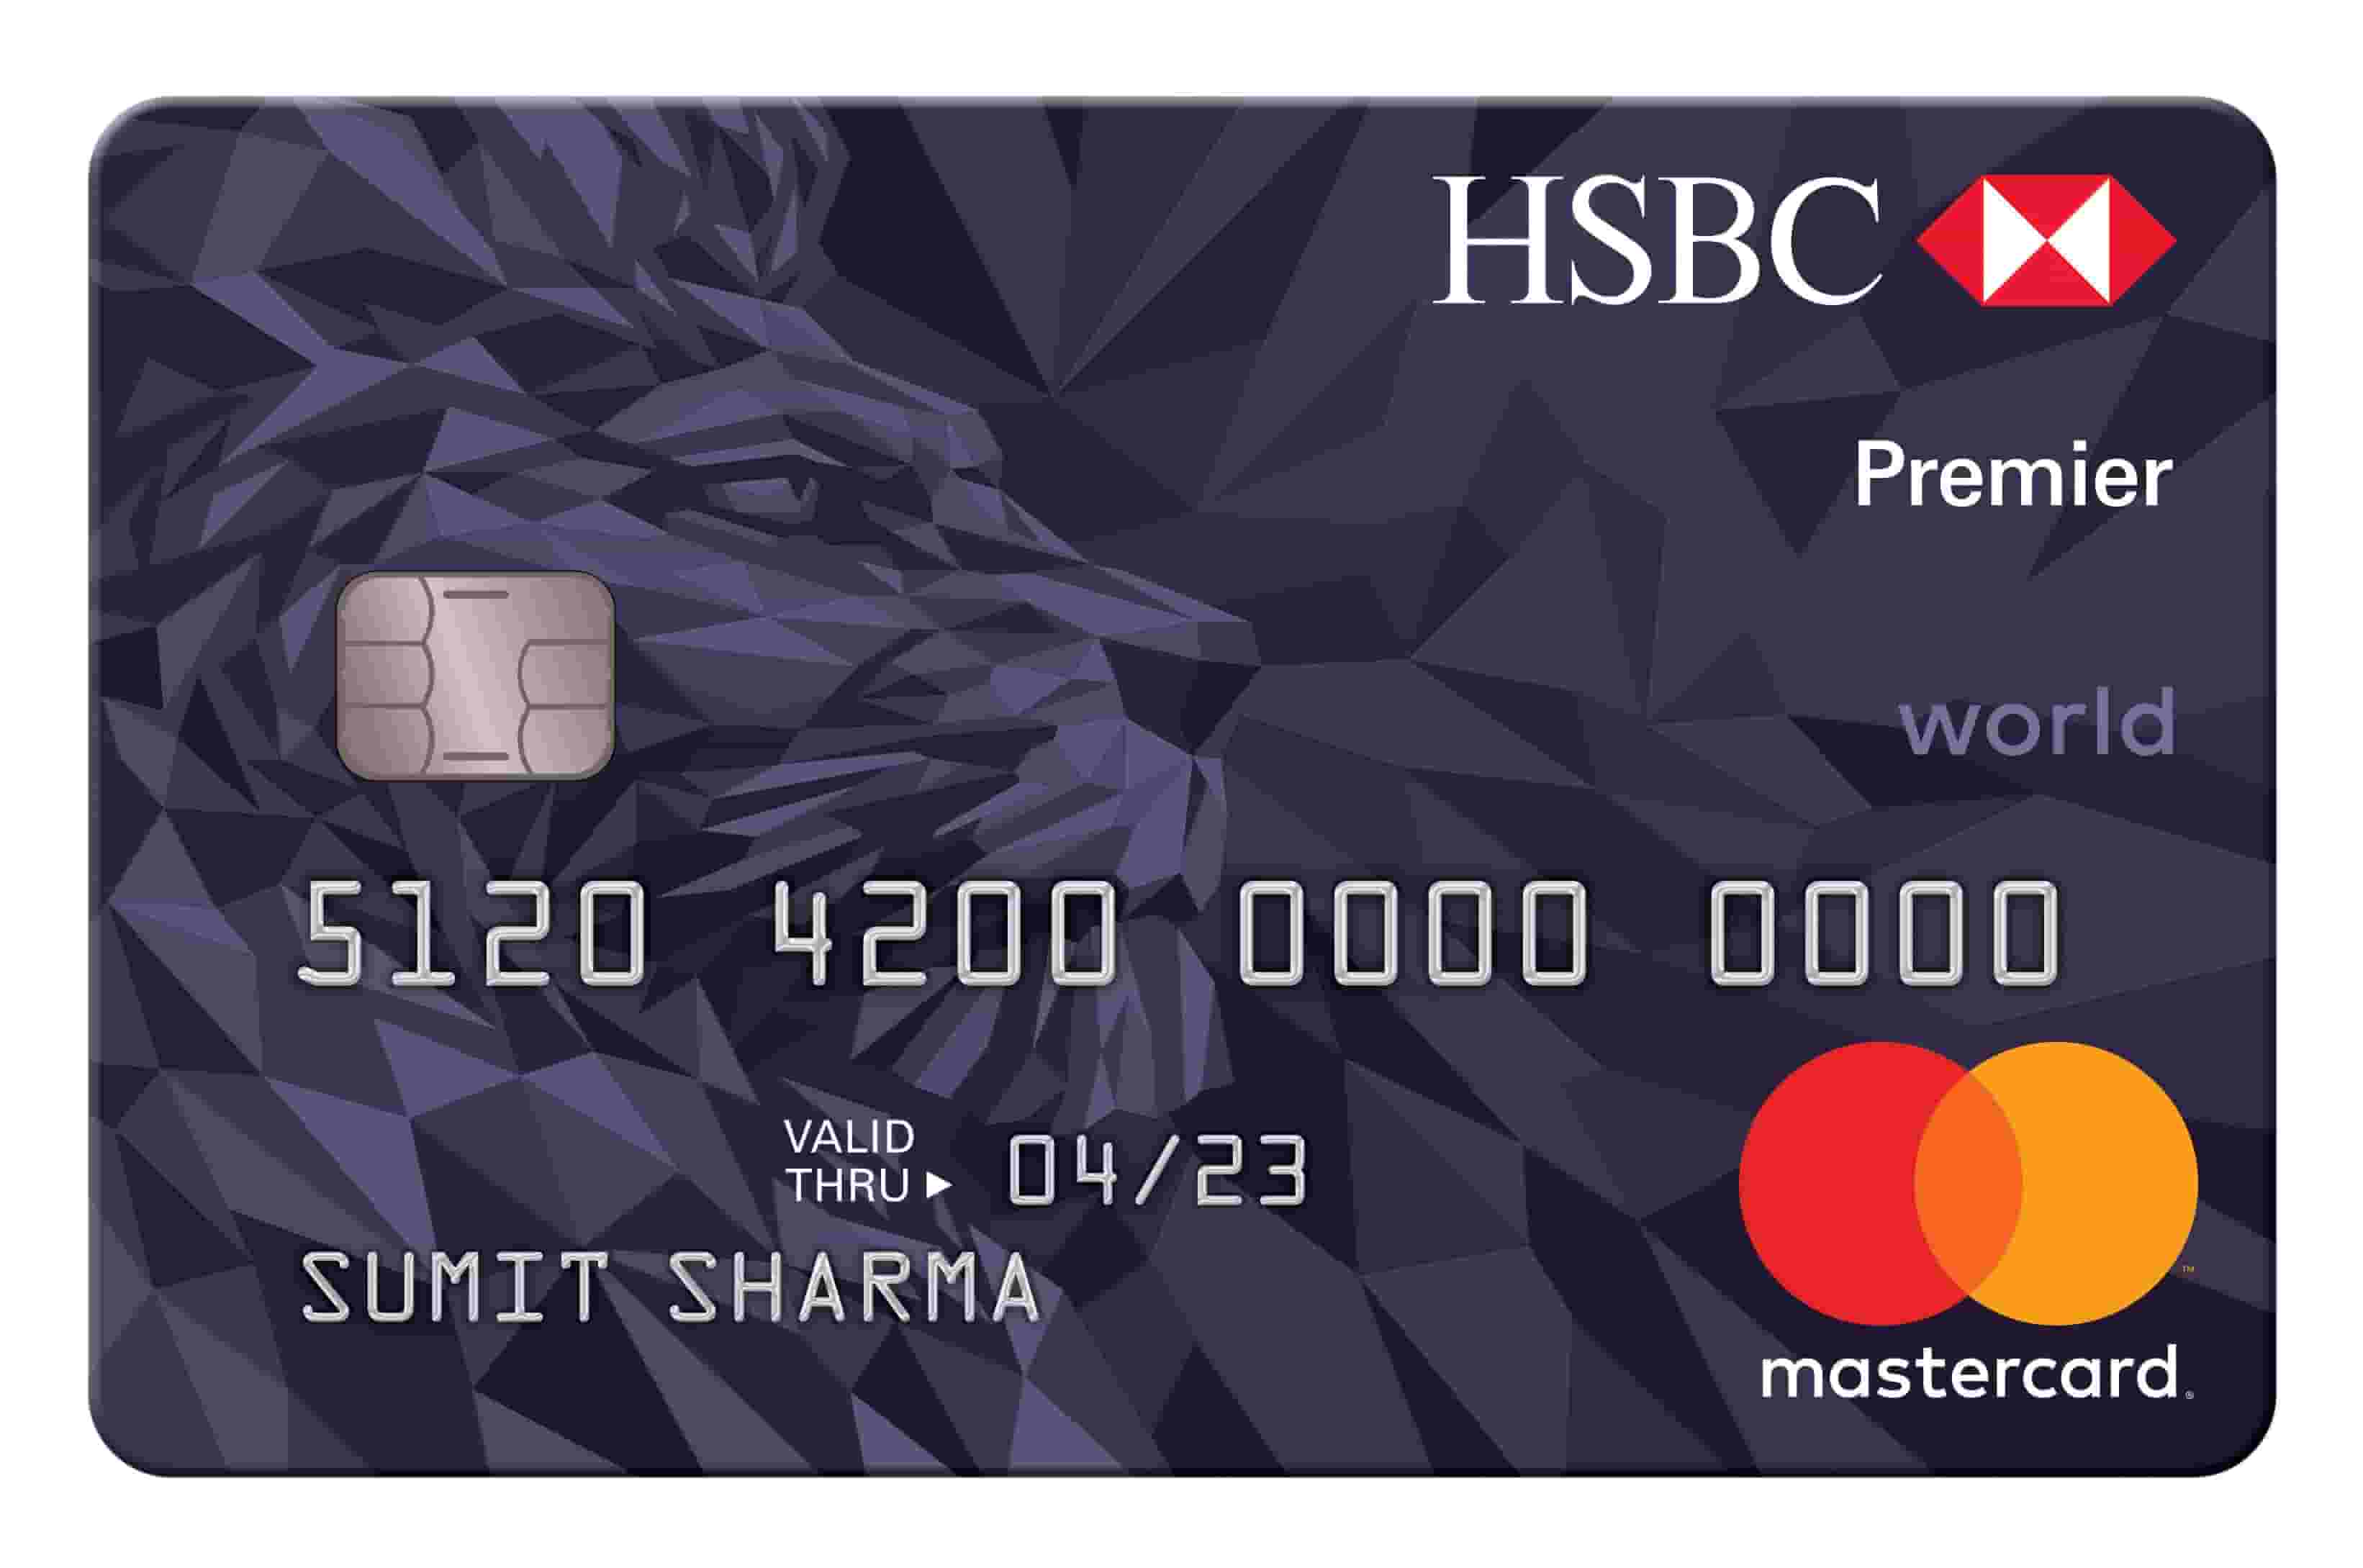 HSBC Premier Mastercard Credit Card: Check Offers & Benefits